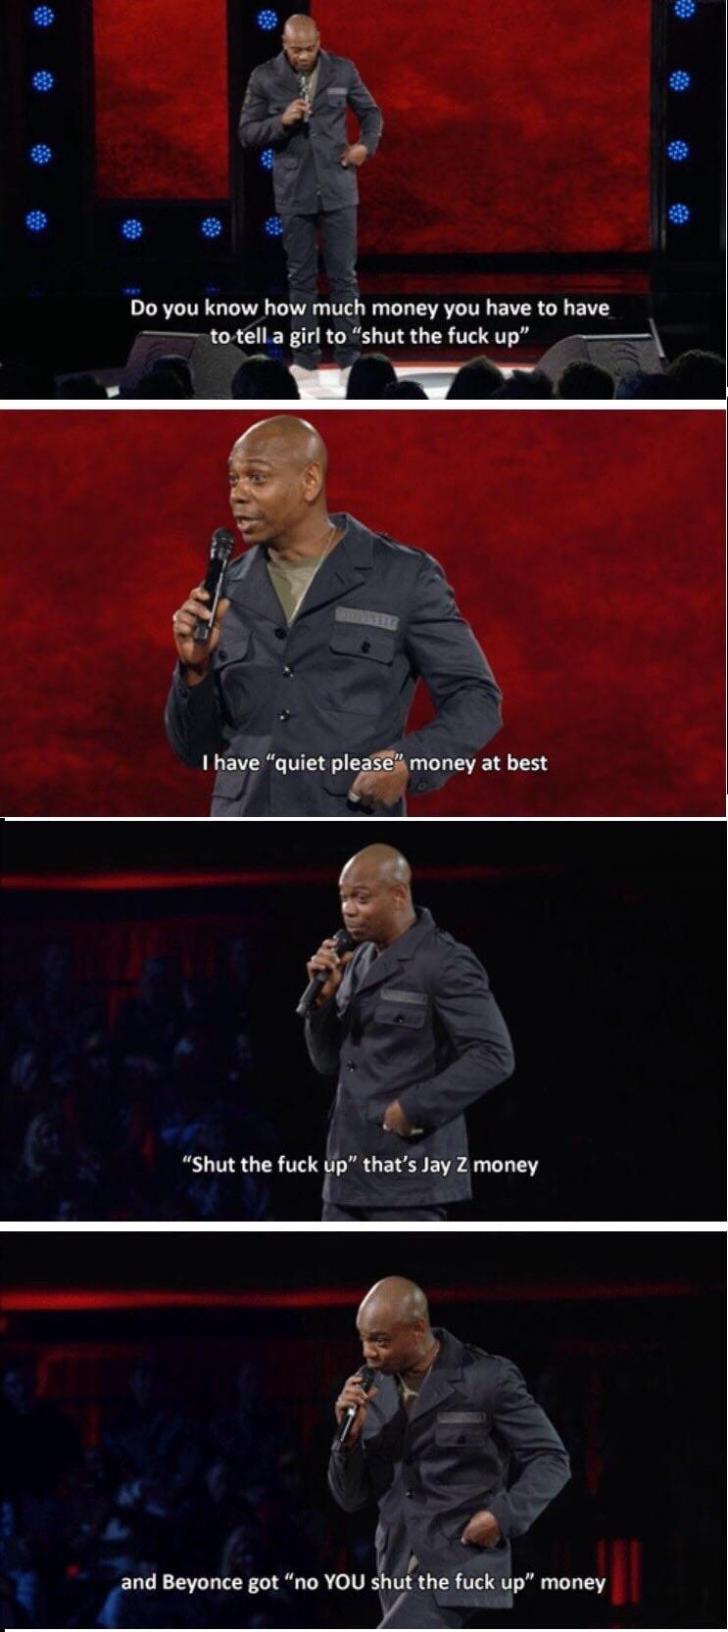 One of the gems from Dave Chappelle's Netflix special.